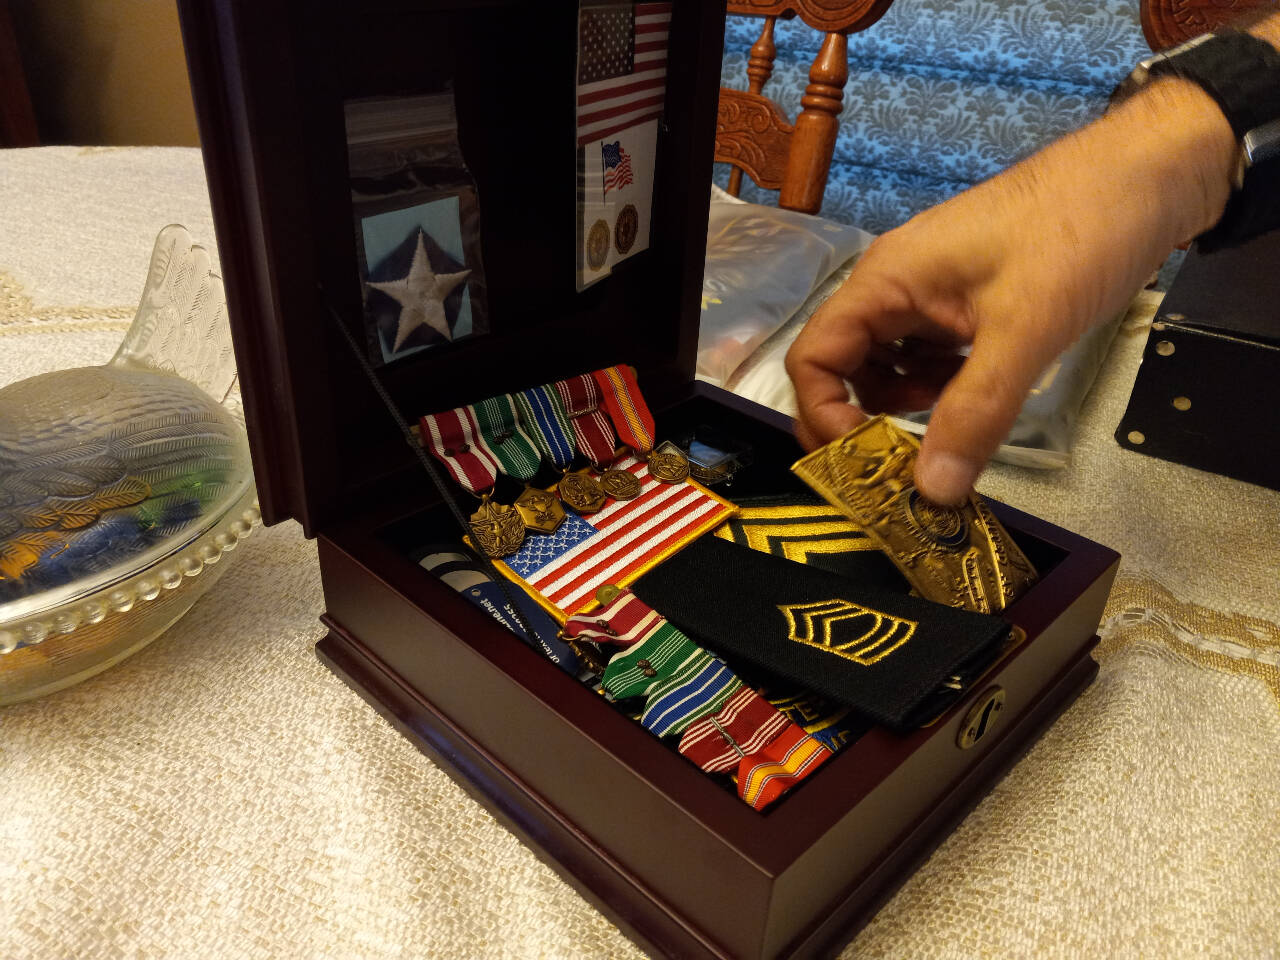 Chriss Moen’s medals from his service in the U.S. Army. Photo by Robert Whale/Auburn Reporter